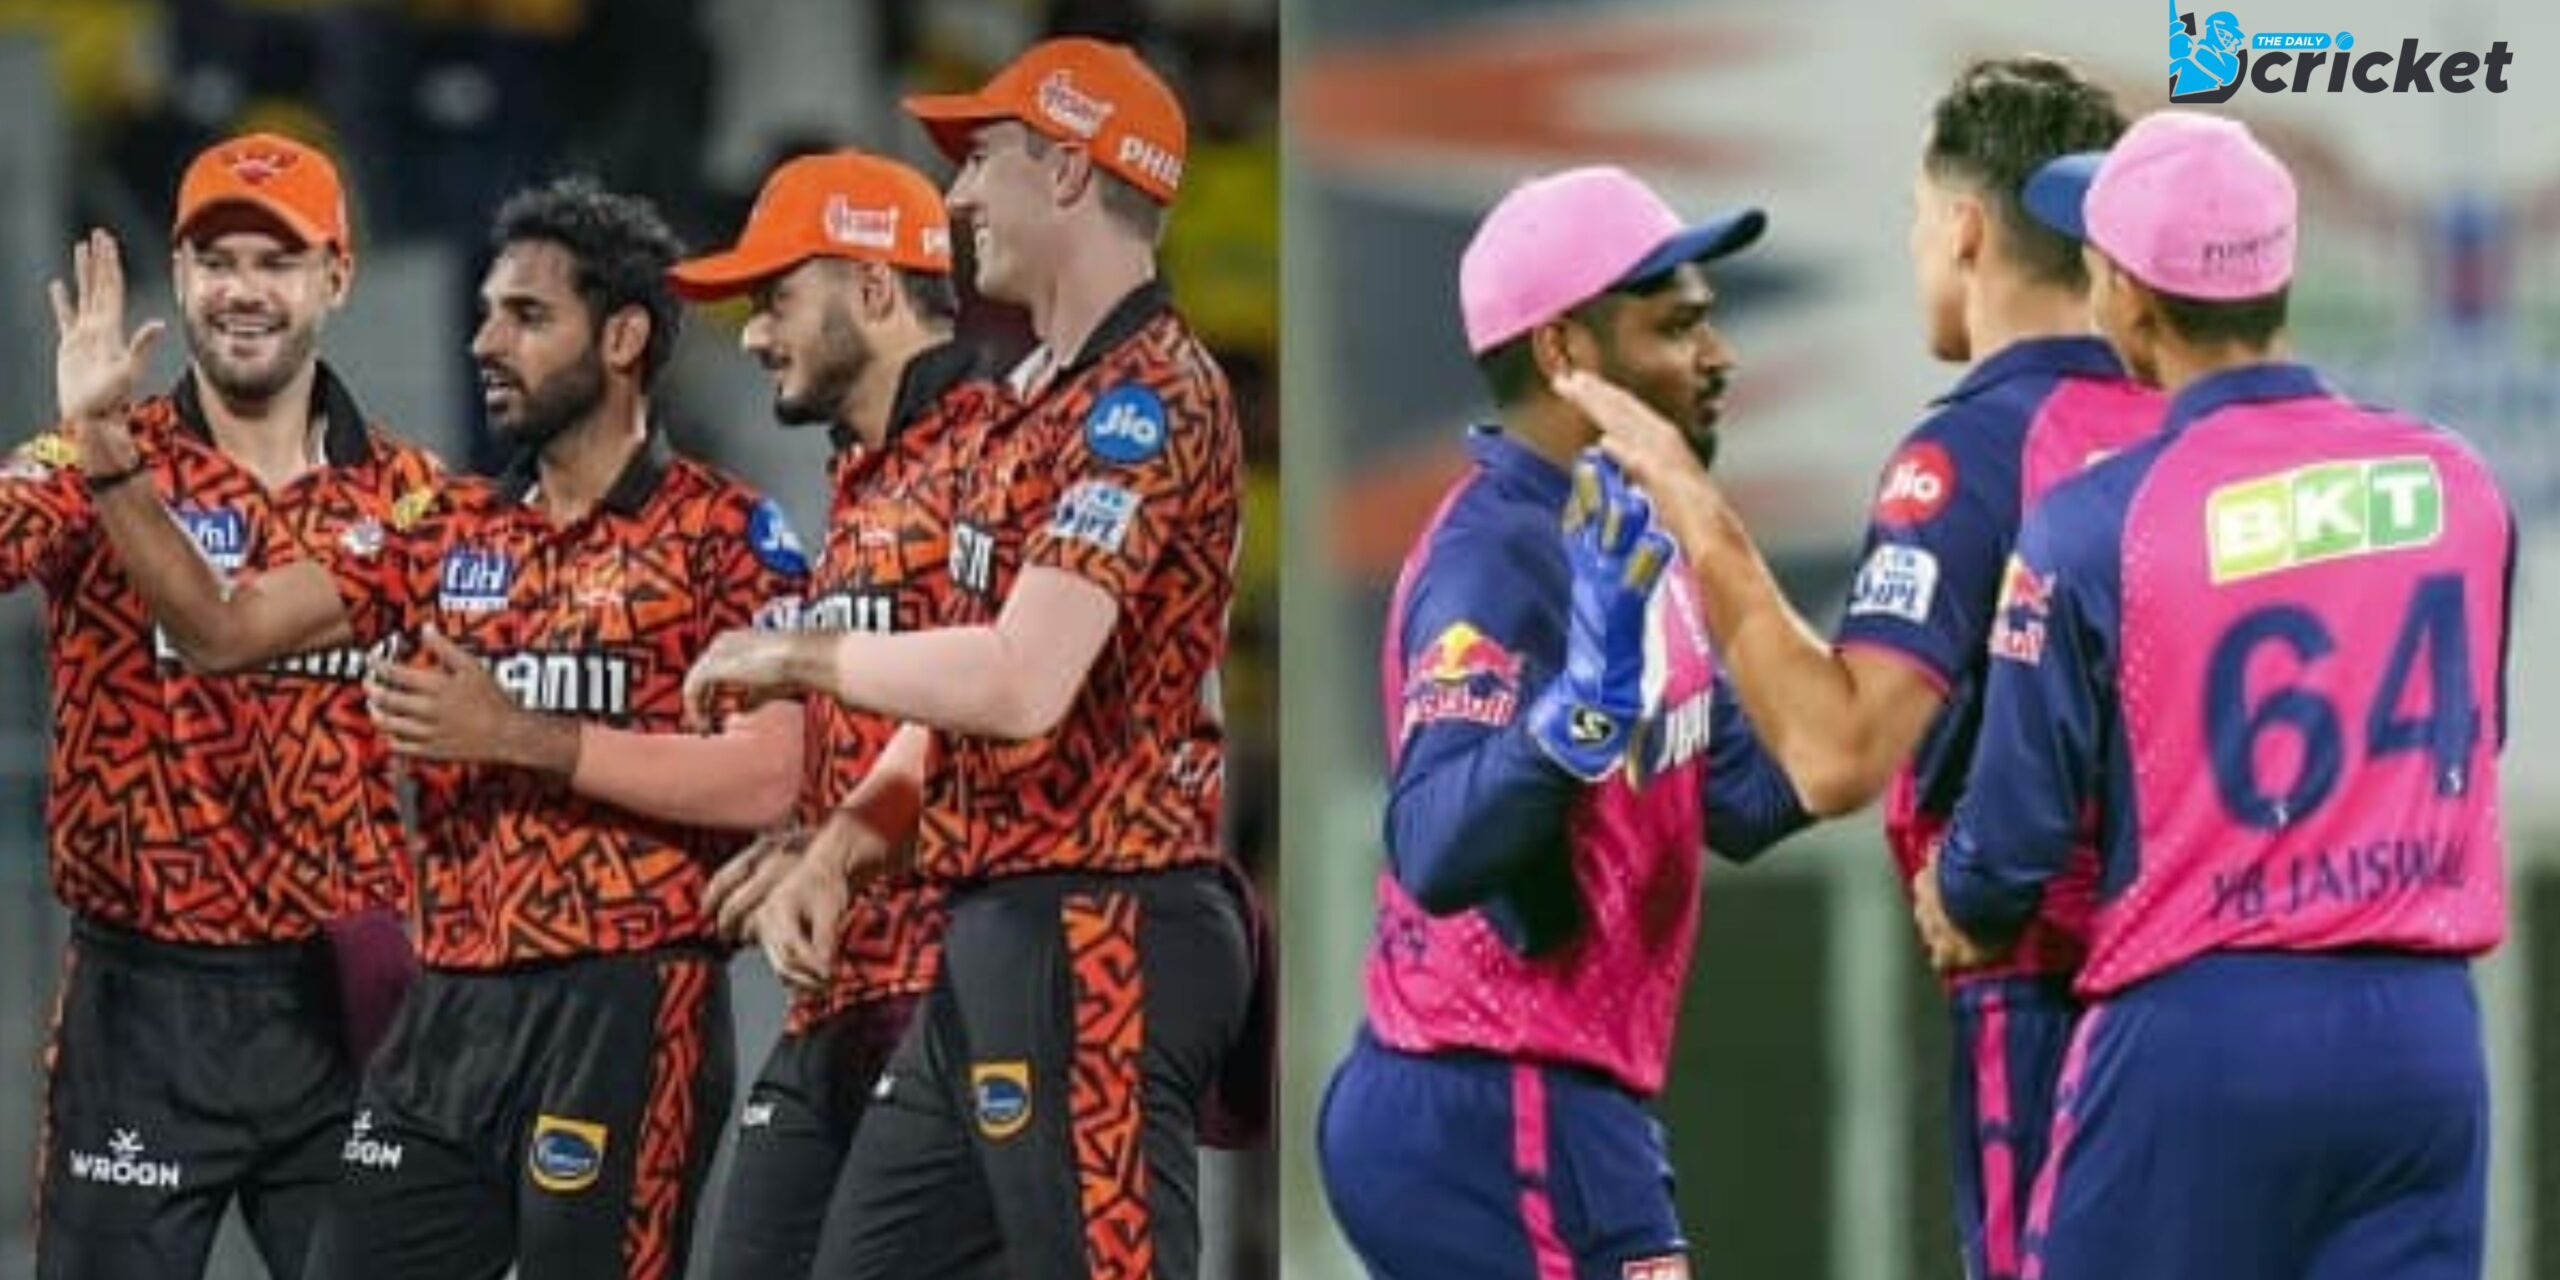 SRH VS RR IPL Match Qualifier 2 Today: Who will win?